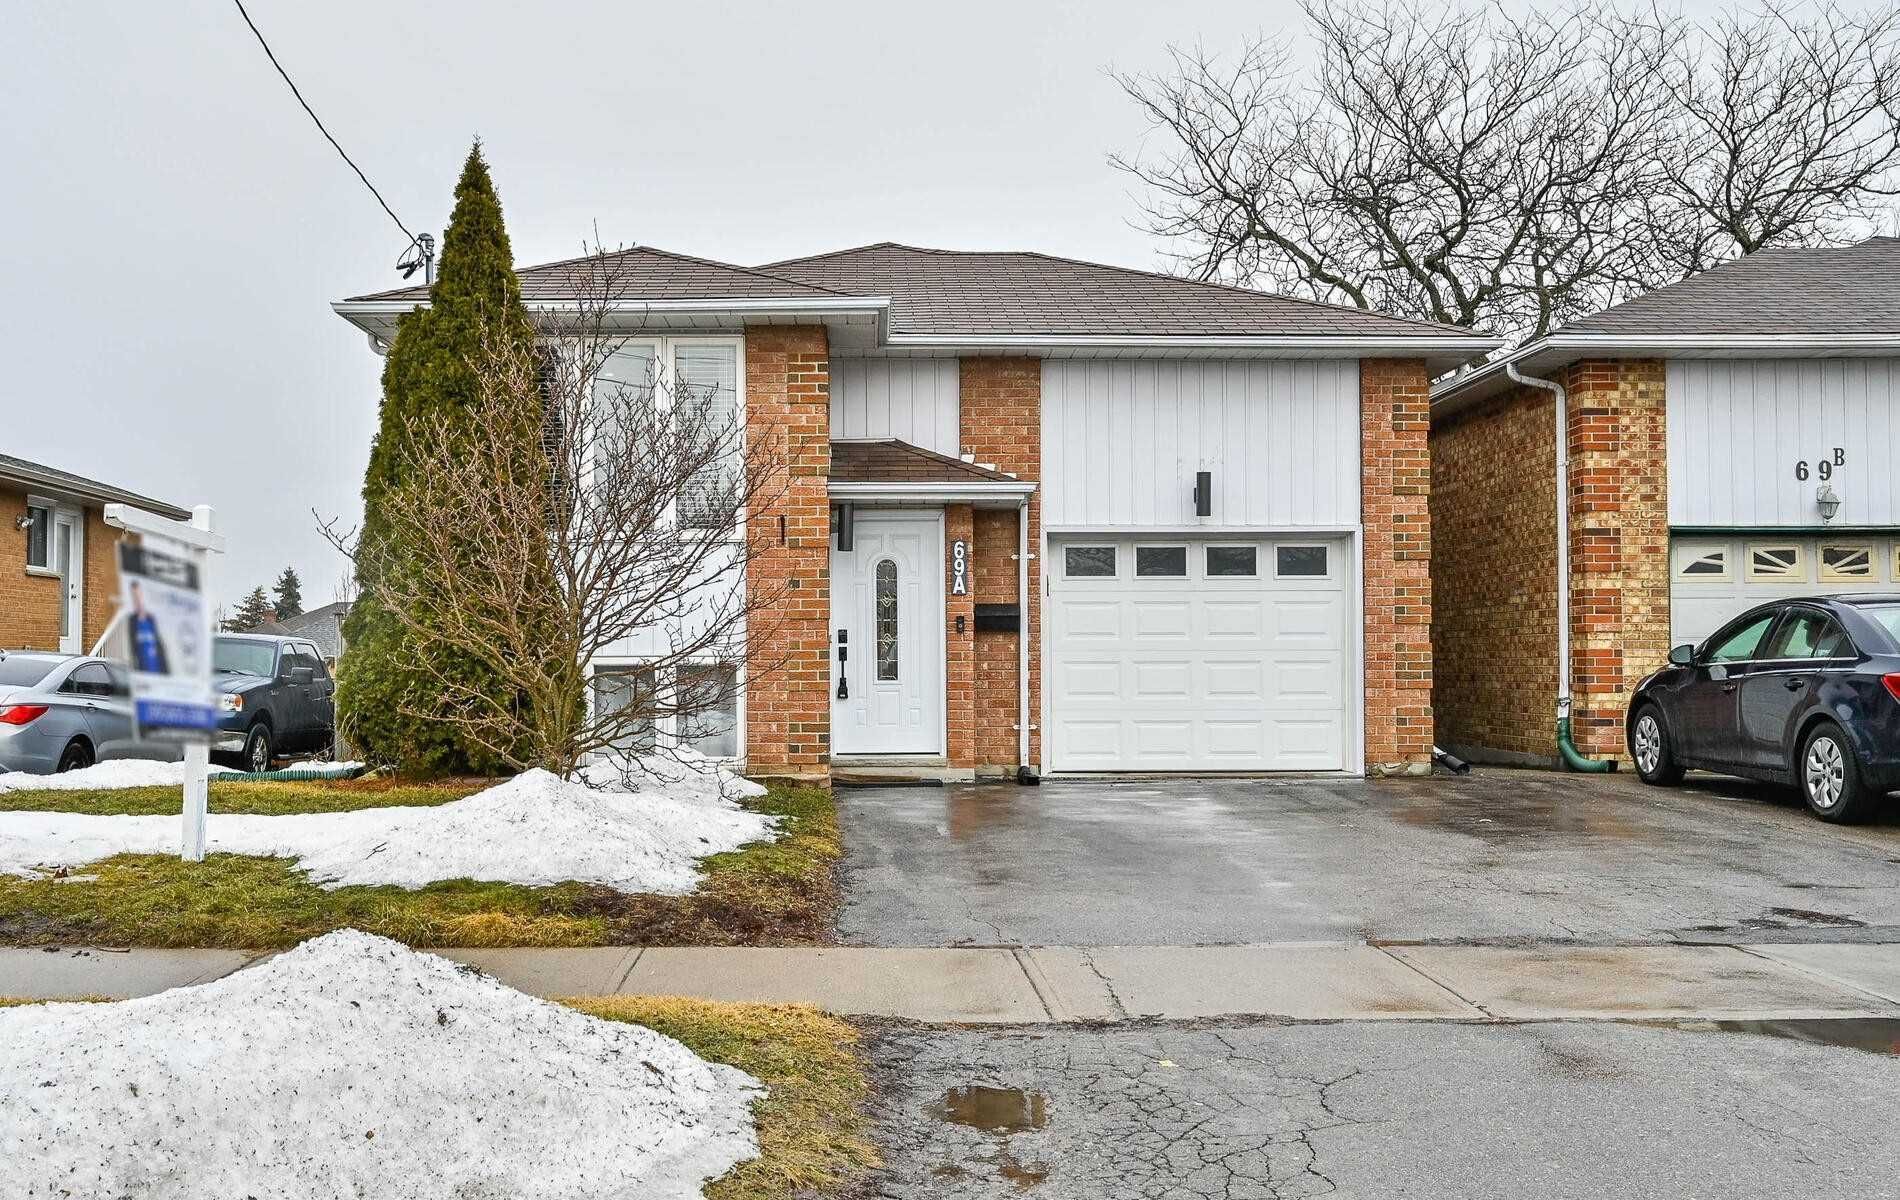 Open House. Open House on Sunday, March 27, 2022 1:00 PM - 3:00 PM